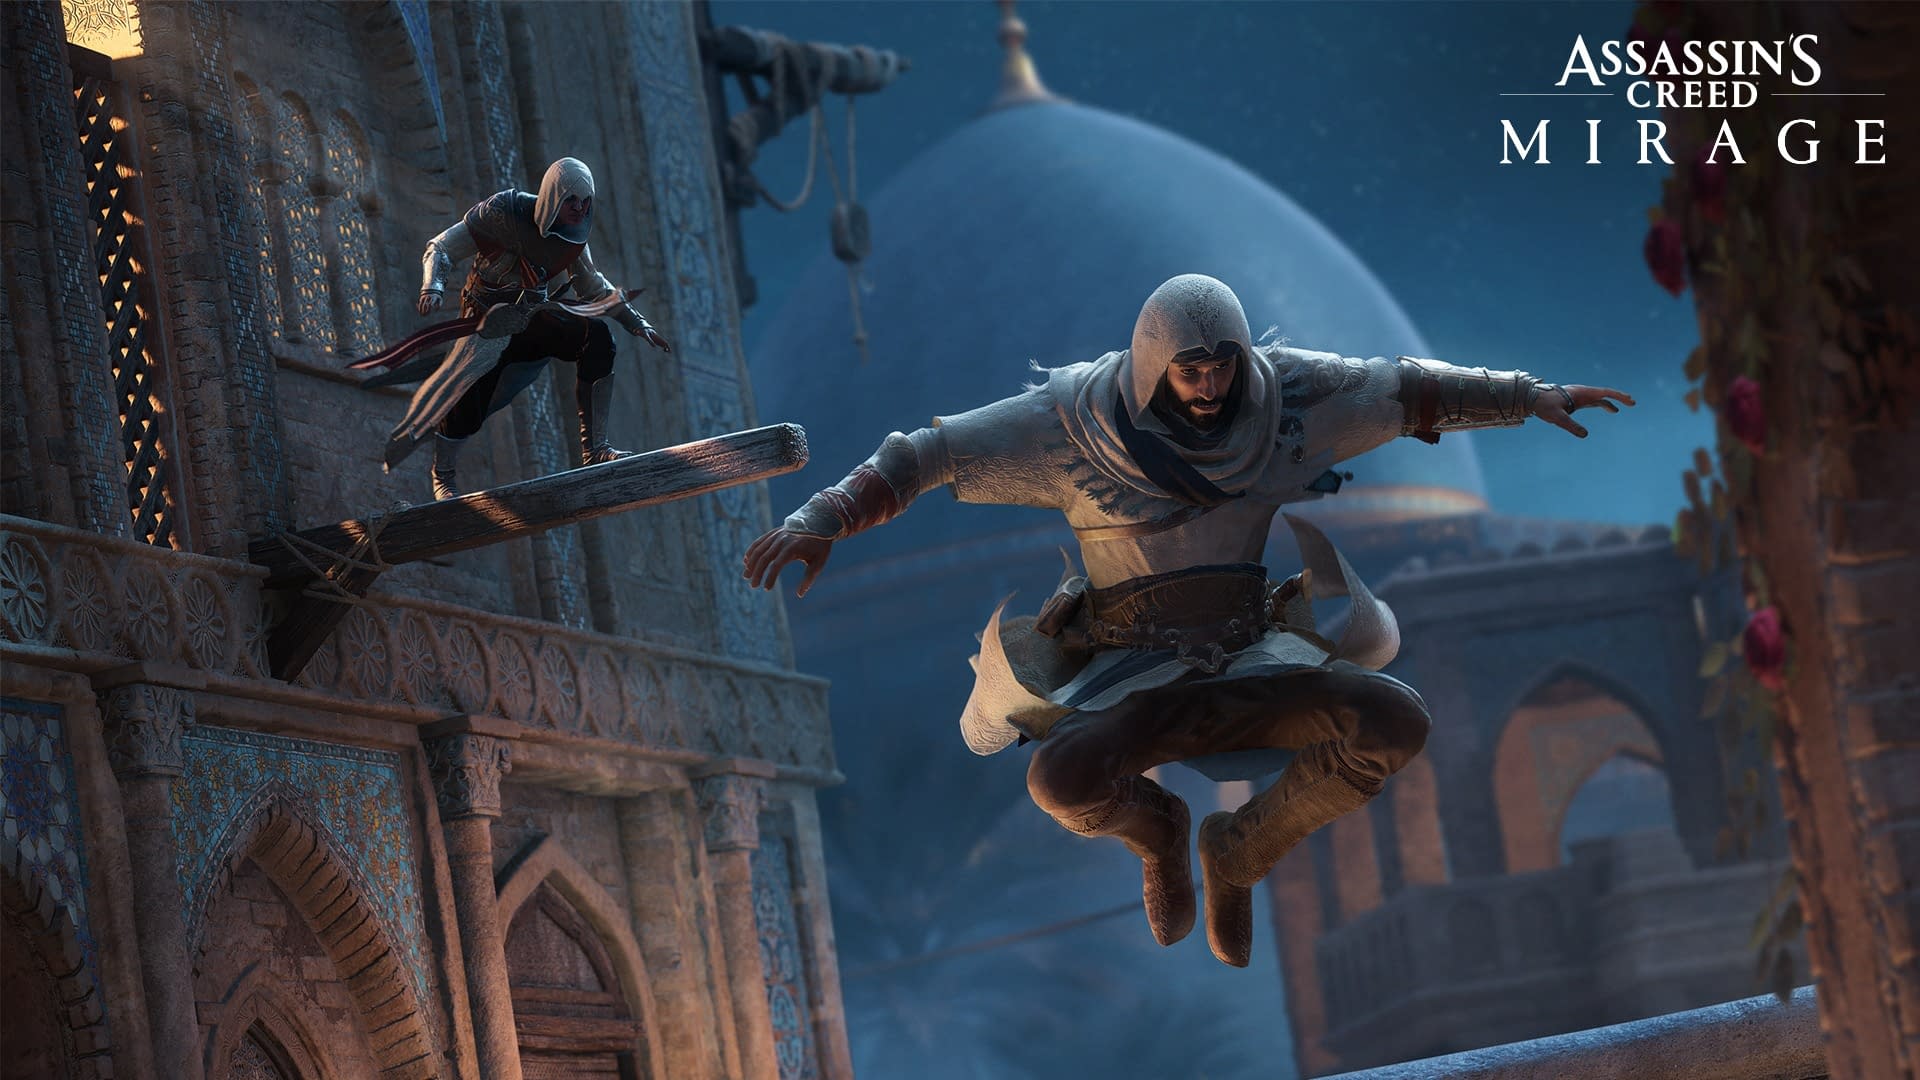 Assassin’s Creed Mirage will run at least 20 Hours!